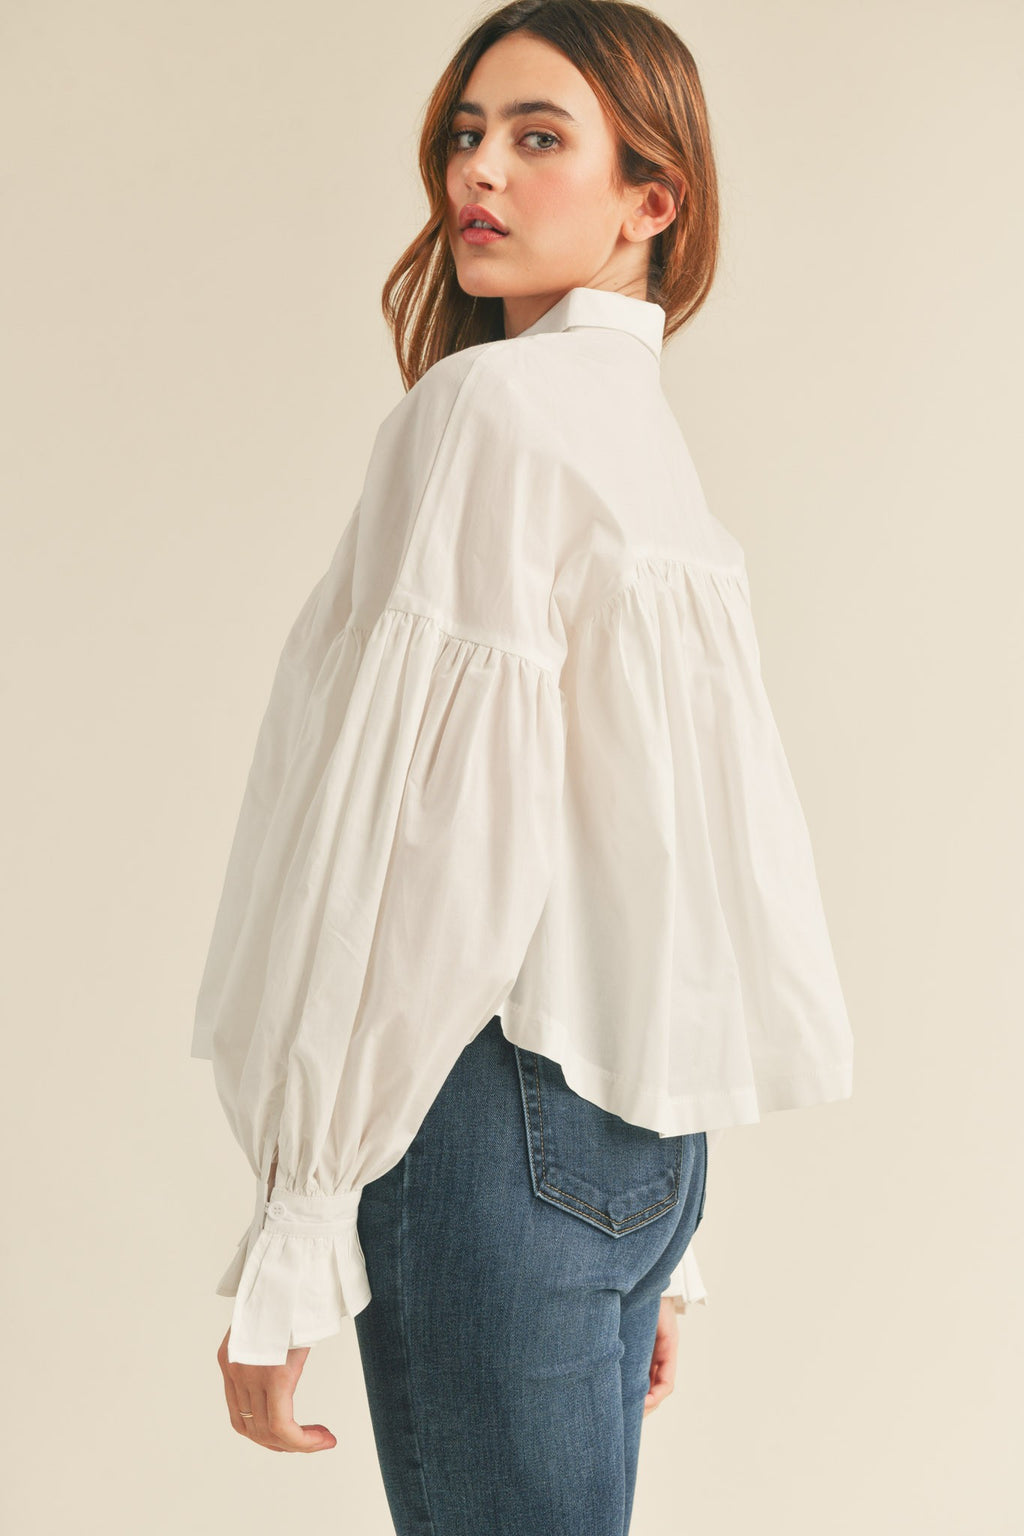 Keep It Simple Button Down Top